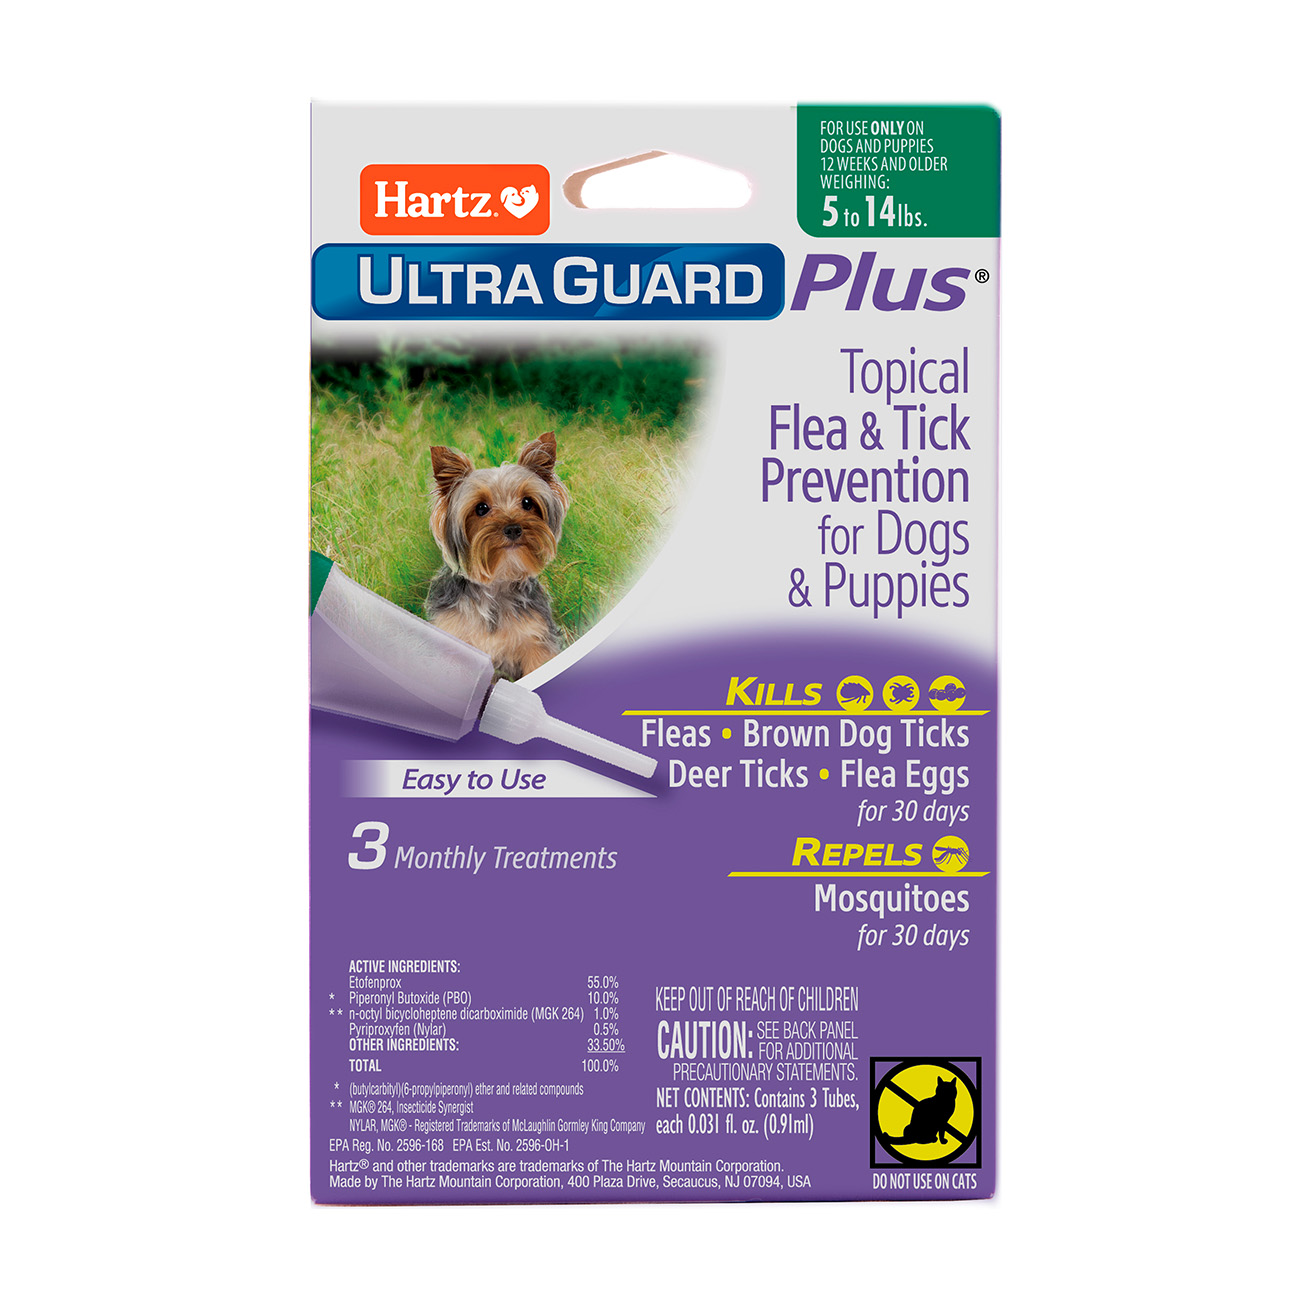 3270098206 Hartz UltraGuard Plus Topical Flea Tick Prevention For Dogs And Puppies 5 14lbs Front 